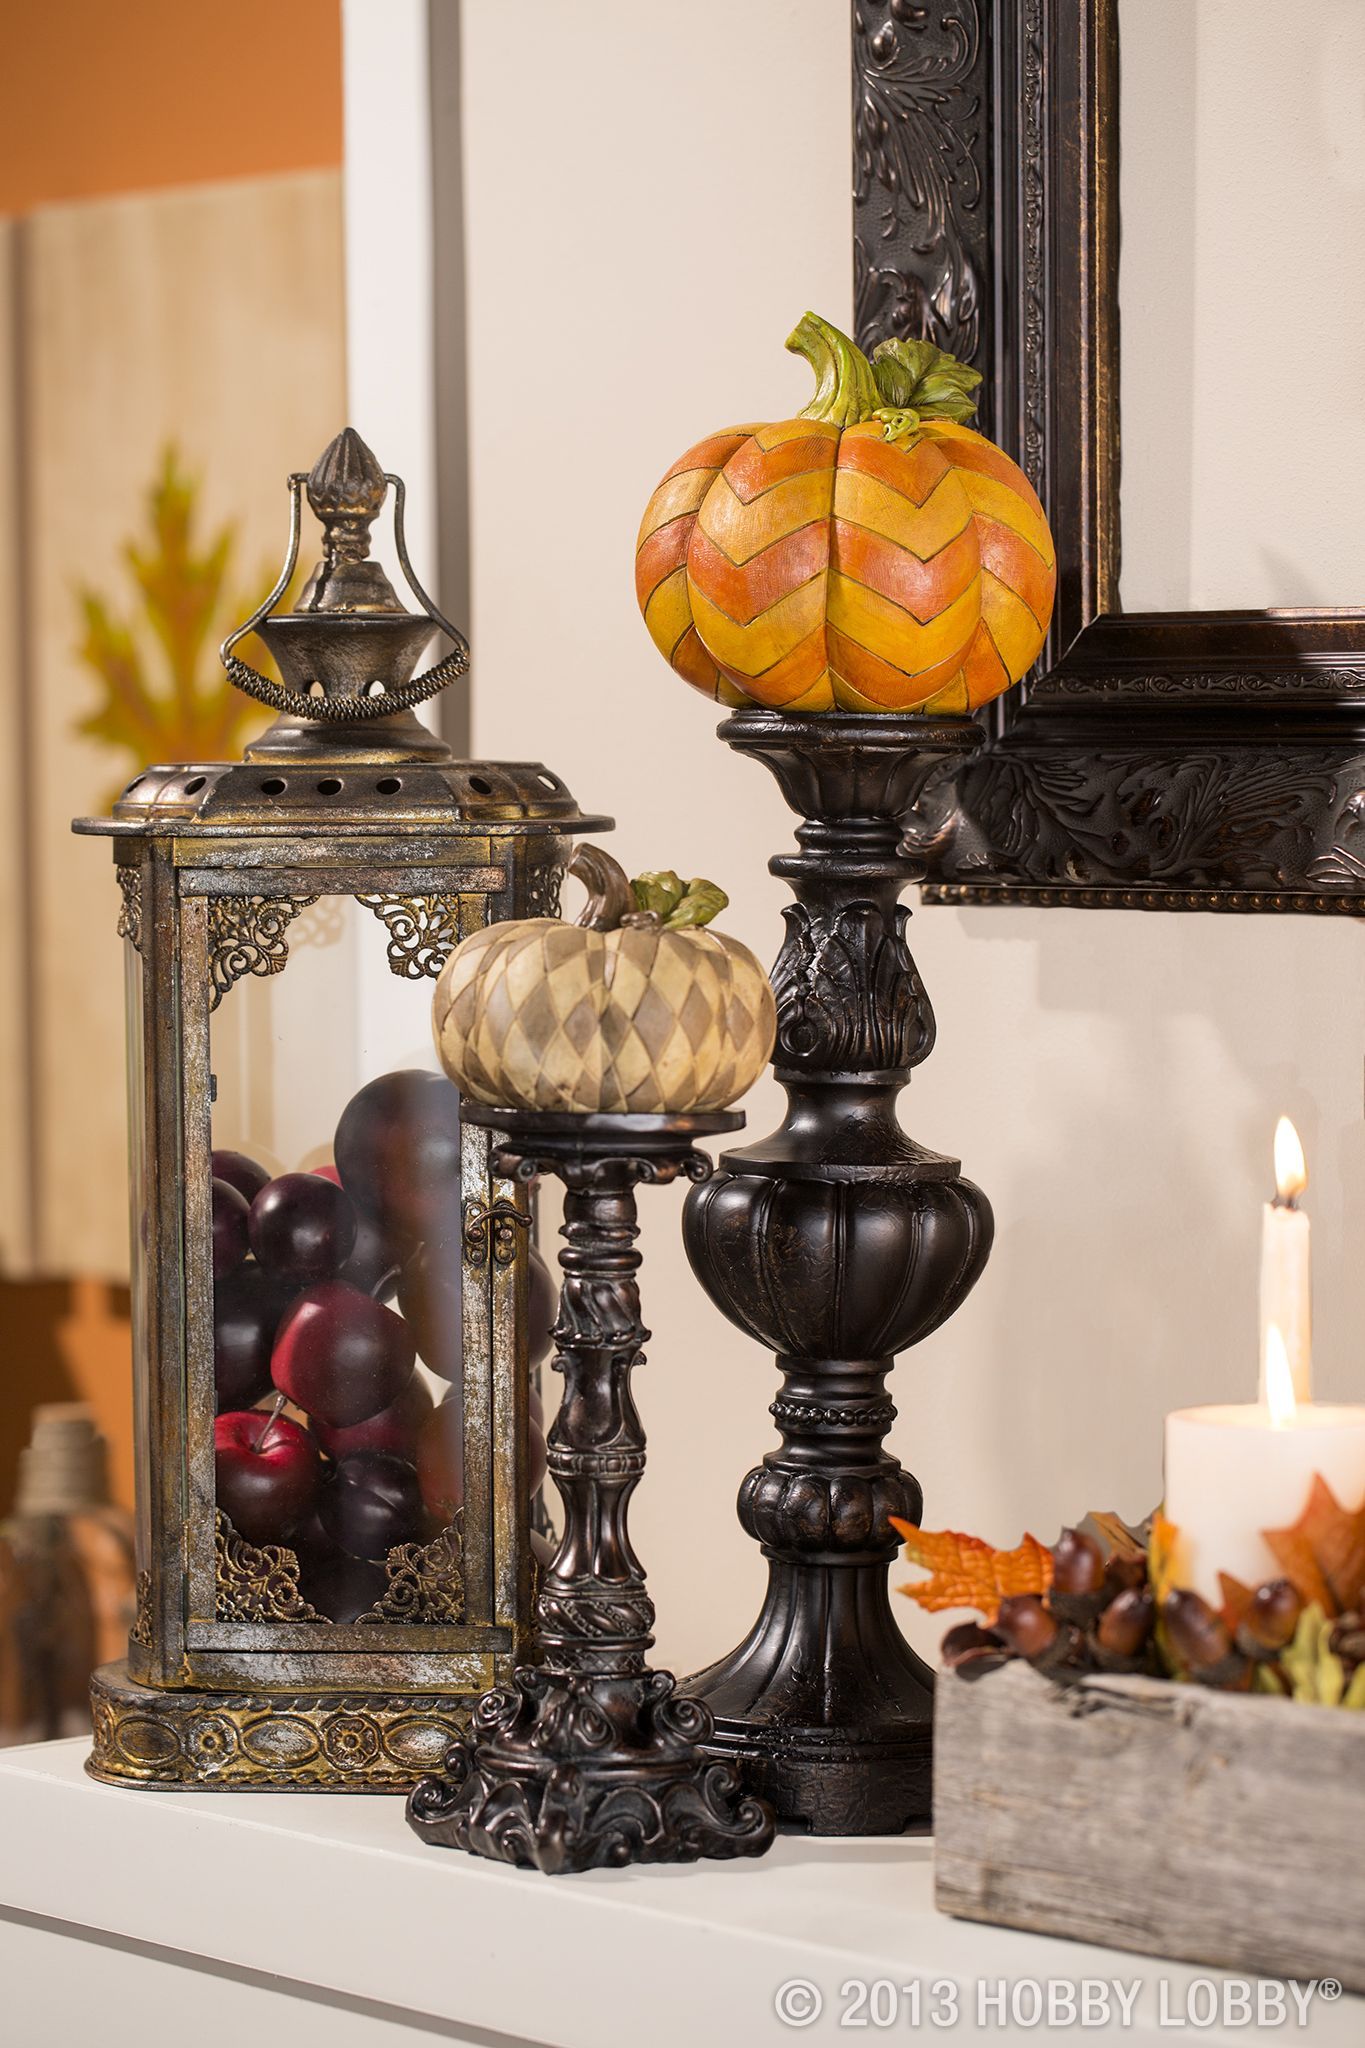 Need some inspiration for fall decor? We have lots of cool-weather ideas to get your decor wheels spinning!